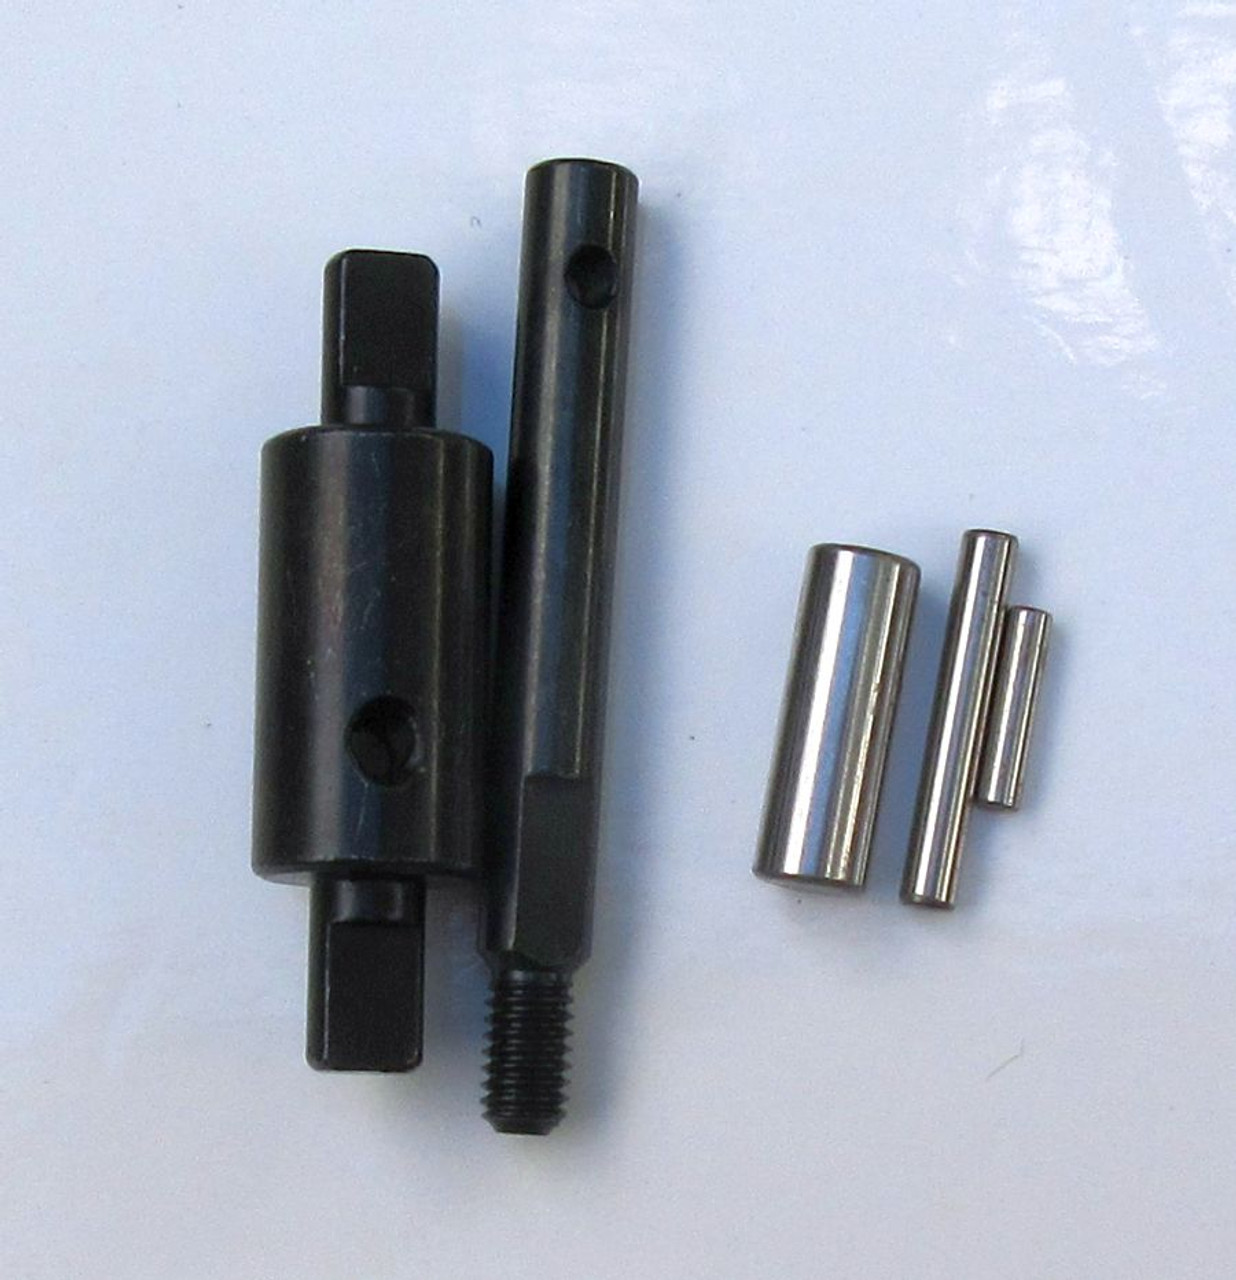 R86043 Transmission Gear Hardware Set (Shaft and Pins) for RGT 86100 Crawlers